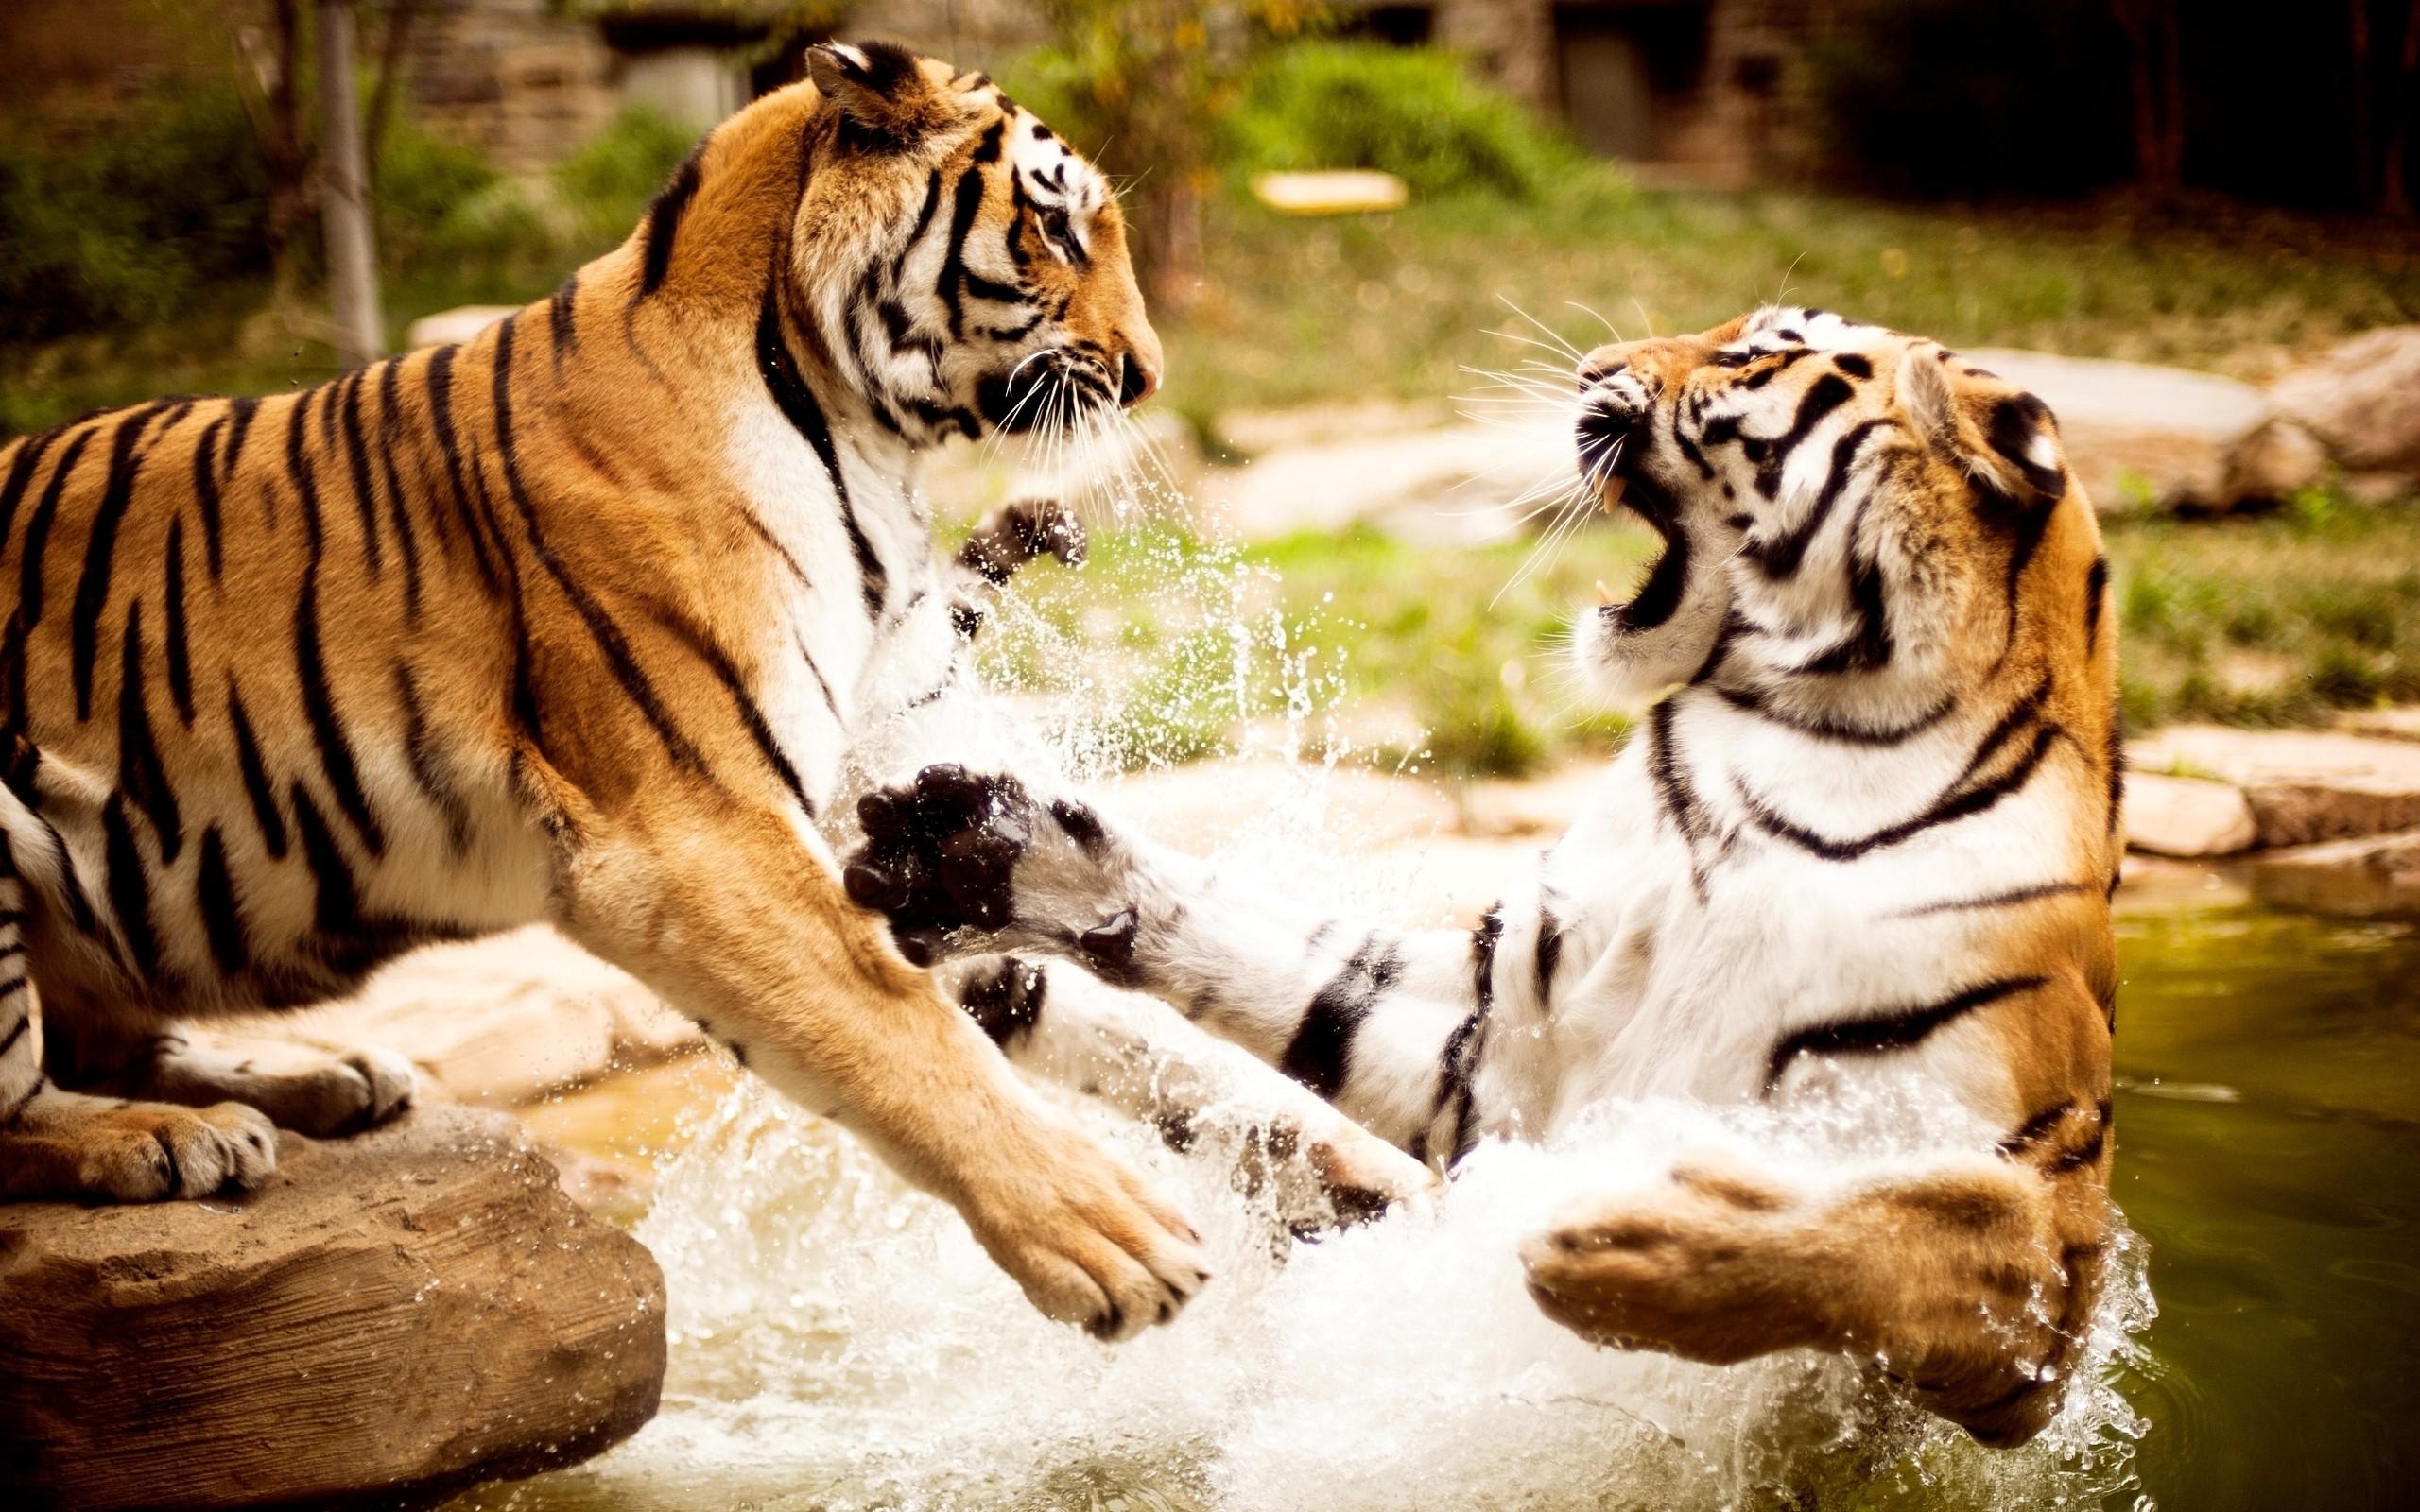 Beautiful Tigers Playing in the Water widescreen wallpaper. Wide